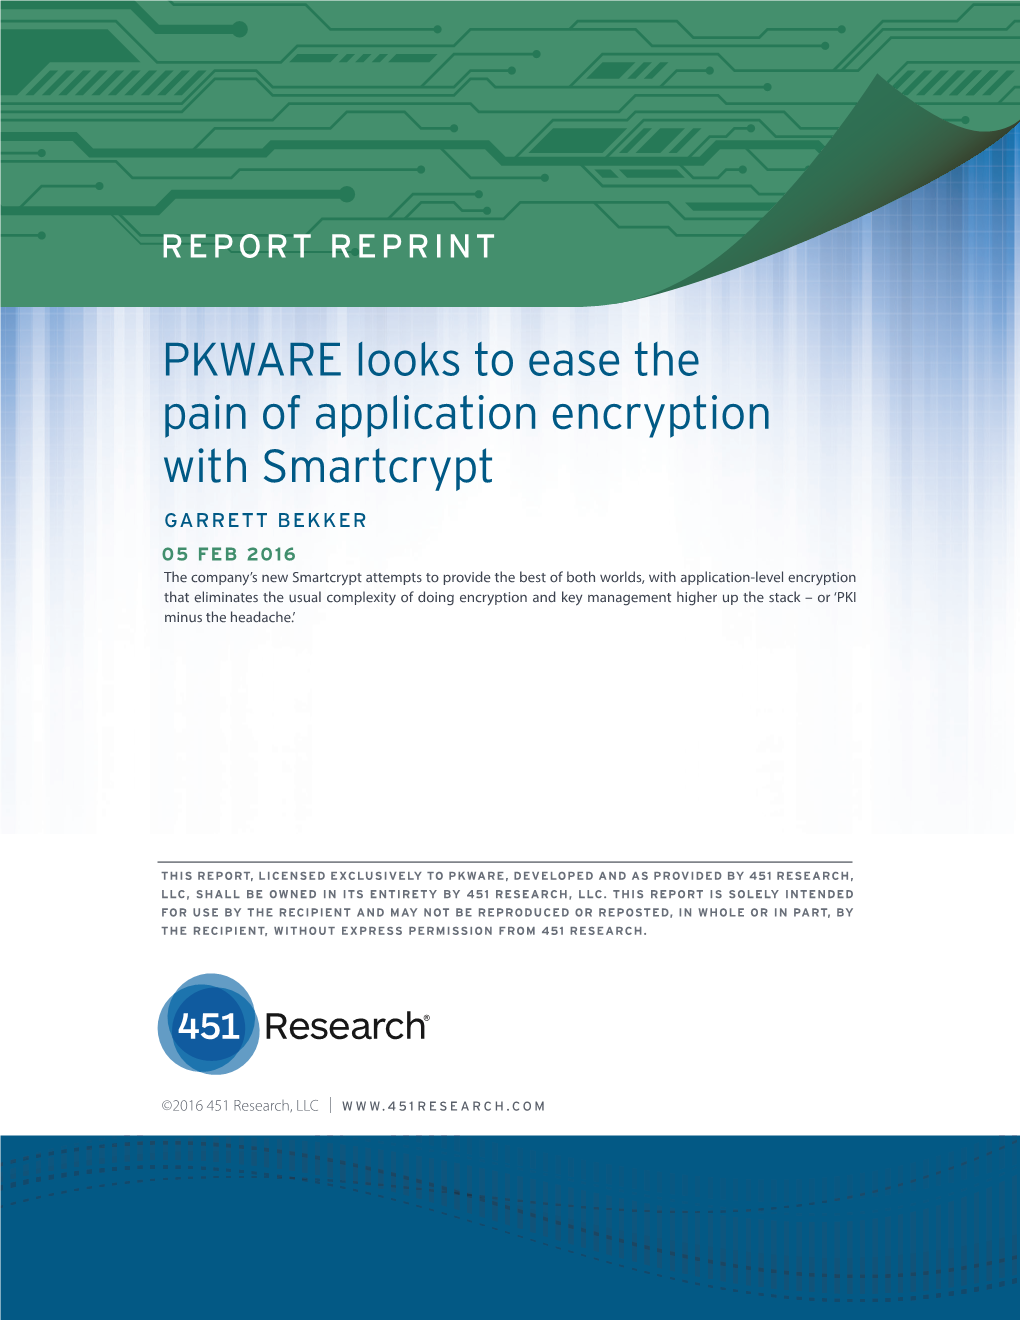 PKWARE Looks to Ease the Pain of Application Encryption with Smartcrypt